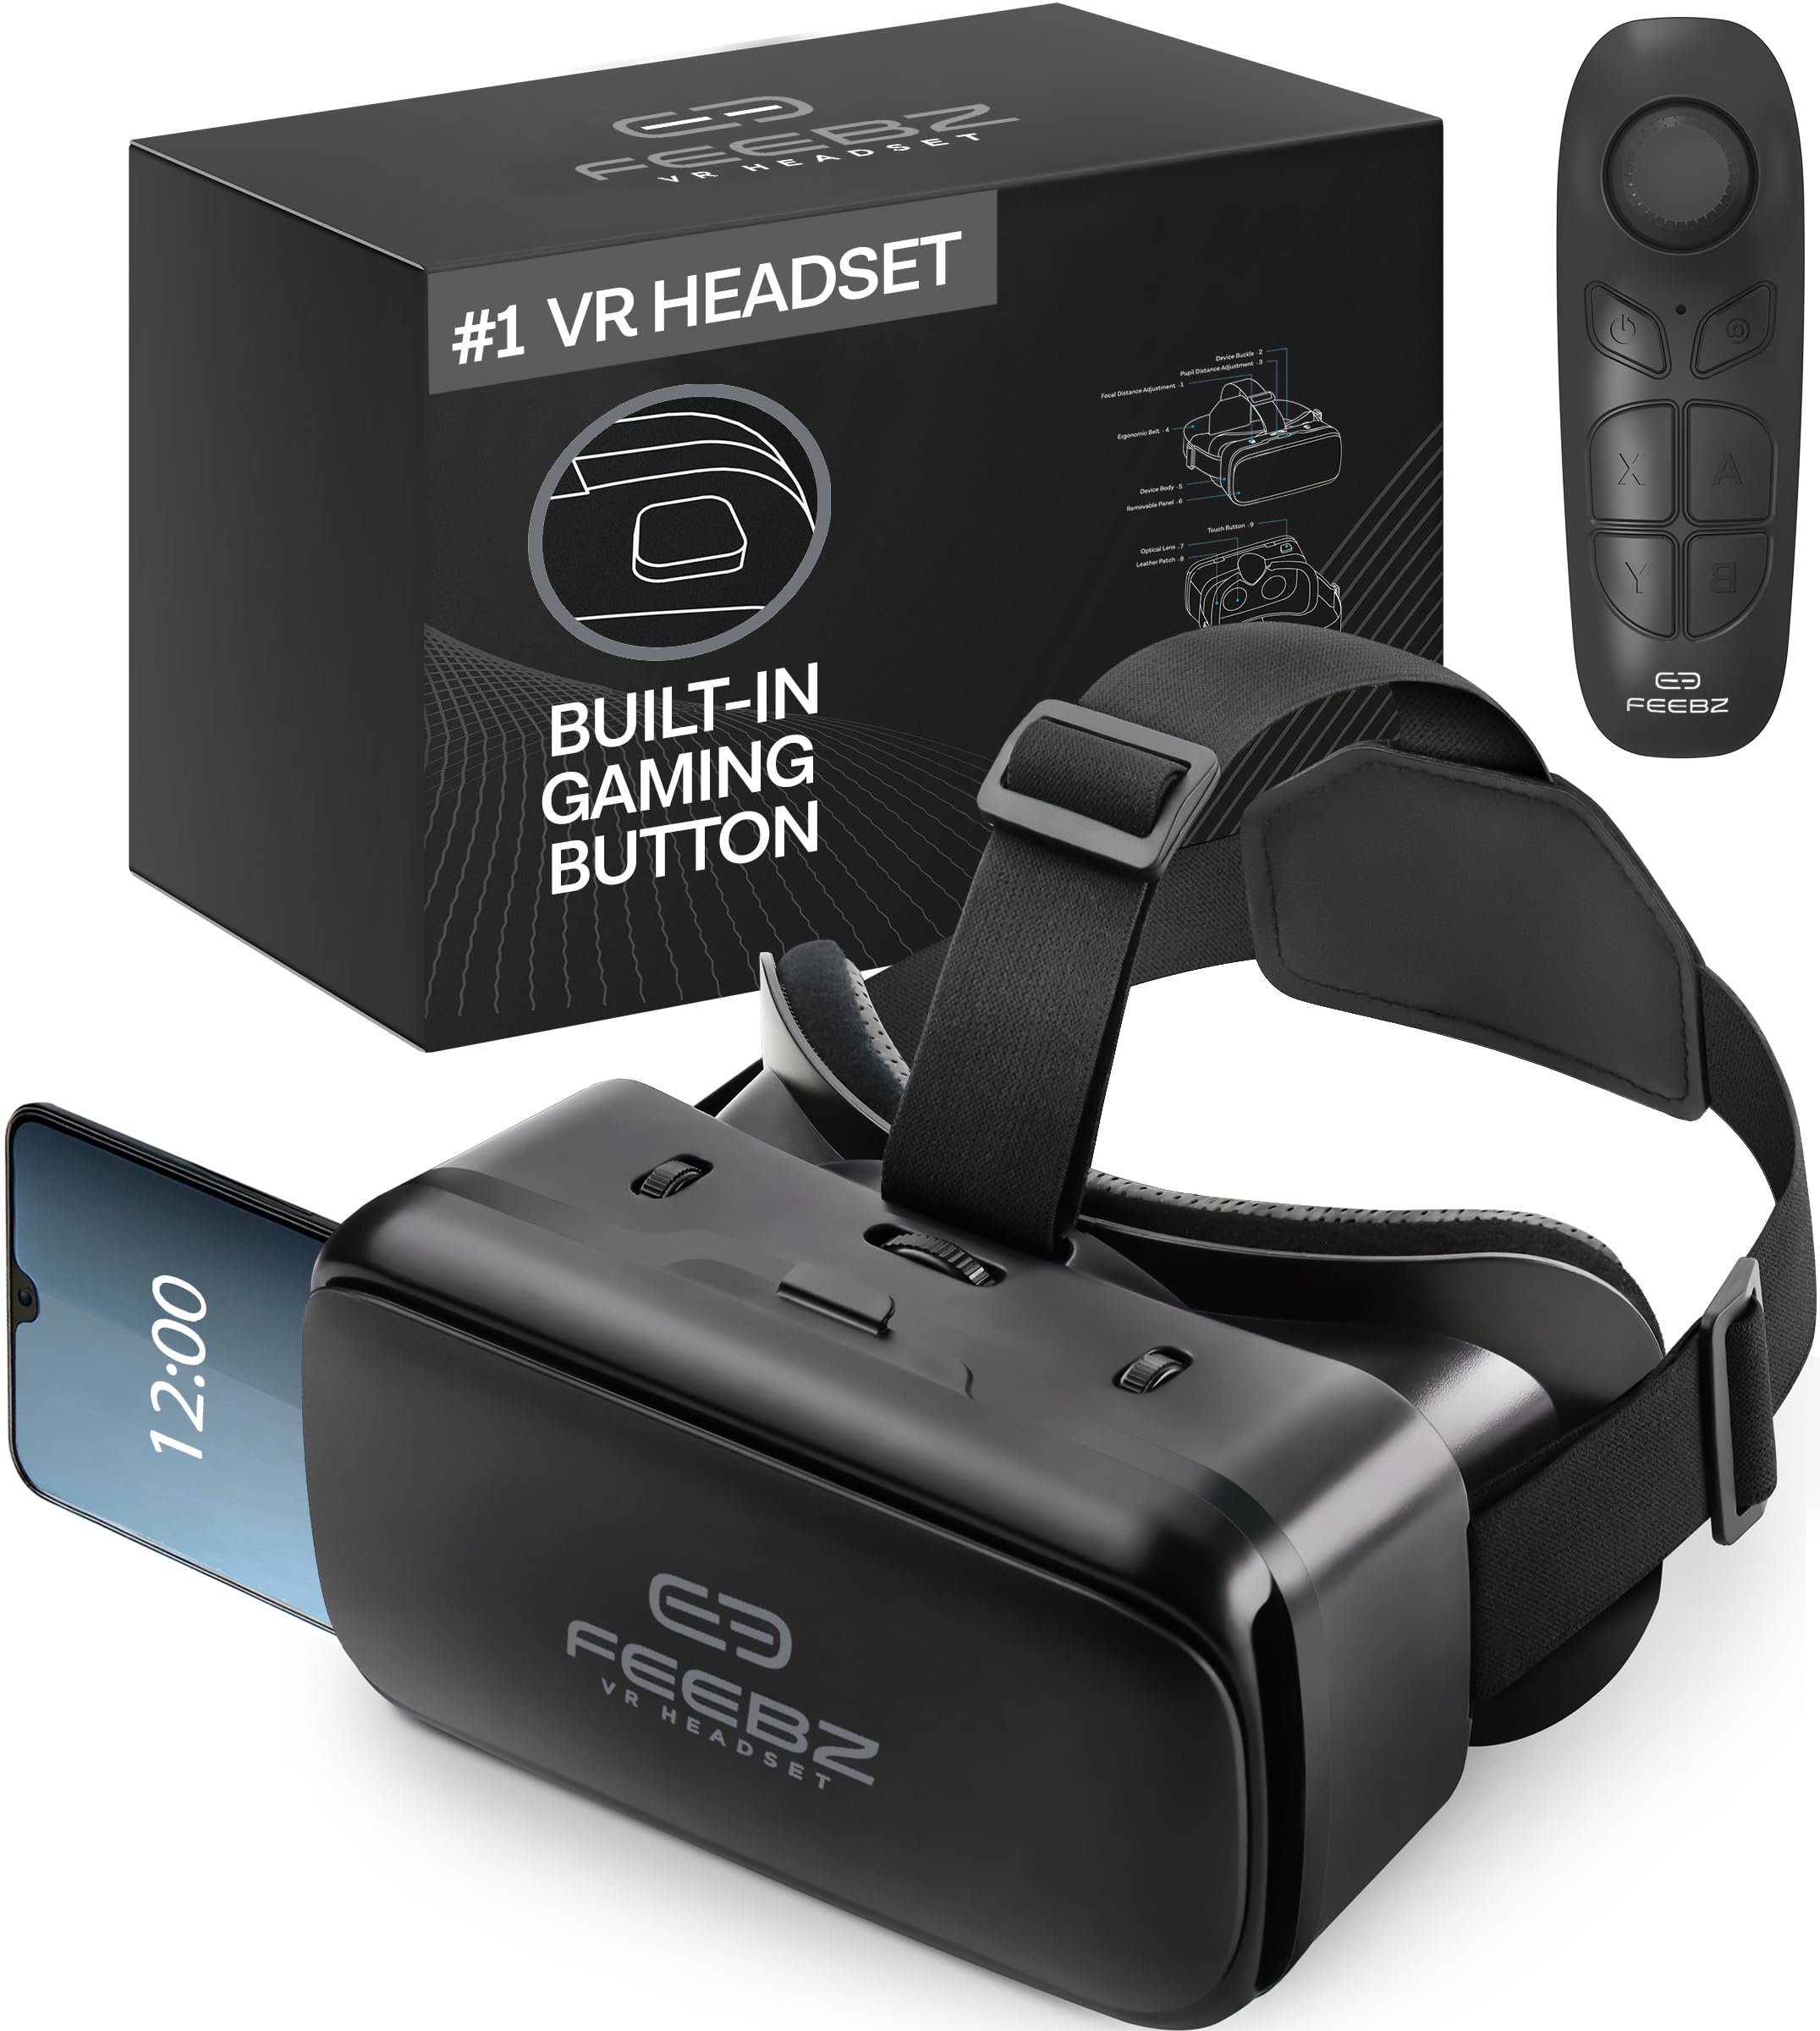 What Is the Best Budget Virtual Reality Headset